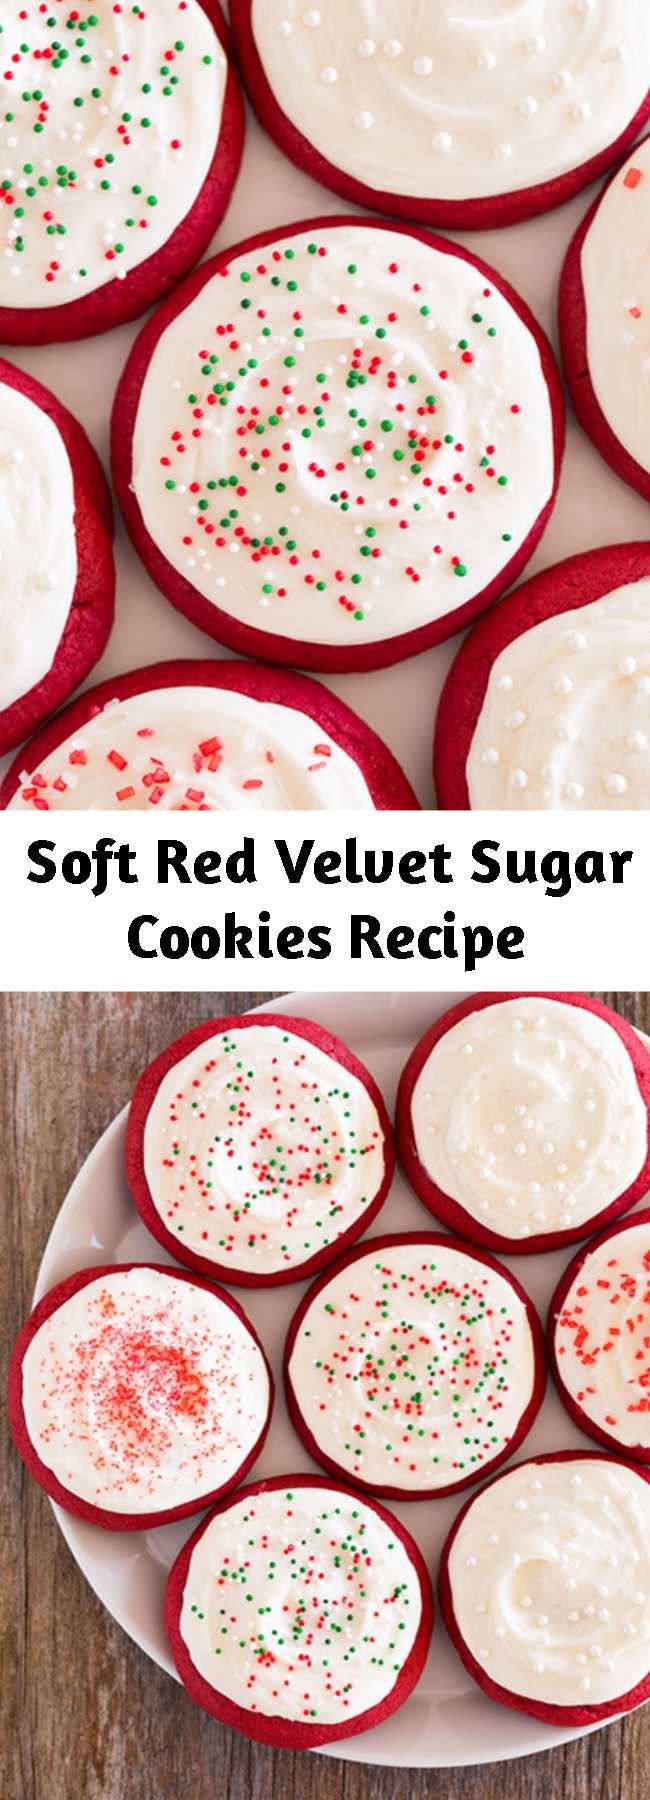 Soft Red Velvet Sugar Cookies Recipe - A soft and tender sugar cookie with the classic flavor and gorgeous color of red velvet cake. Finished with a rich and creamy cream cheese frosting.